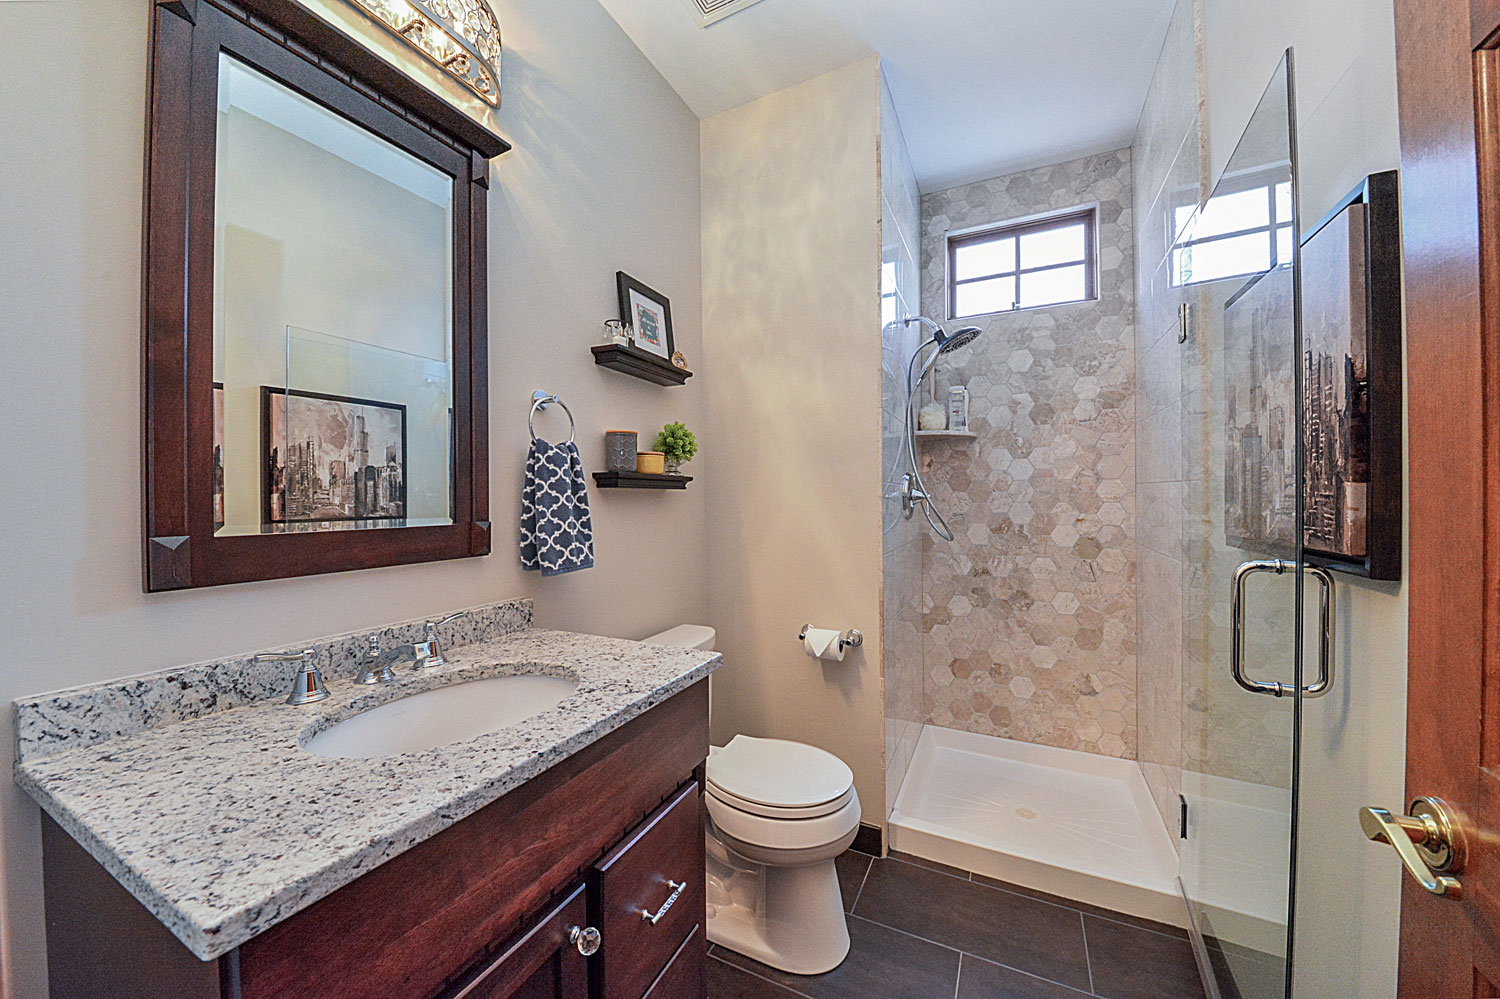 Patrick & Sharon's Bathroom Remodel Pictures | Home ...